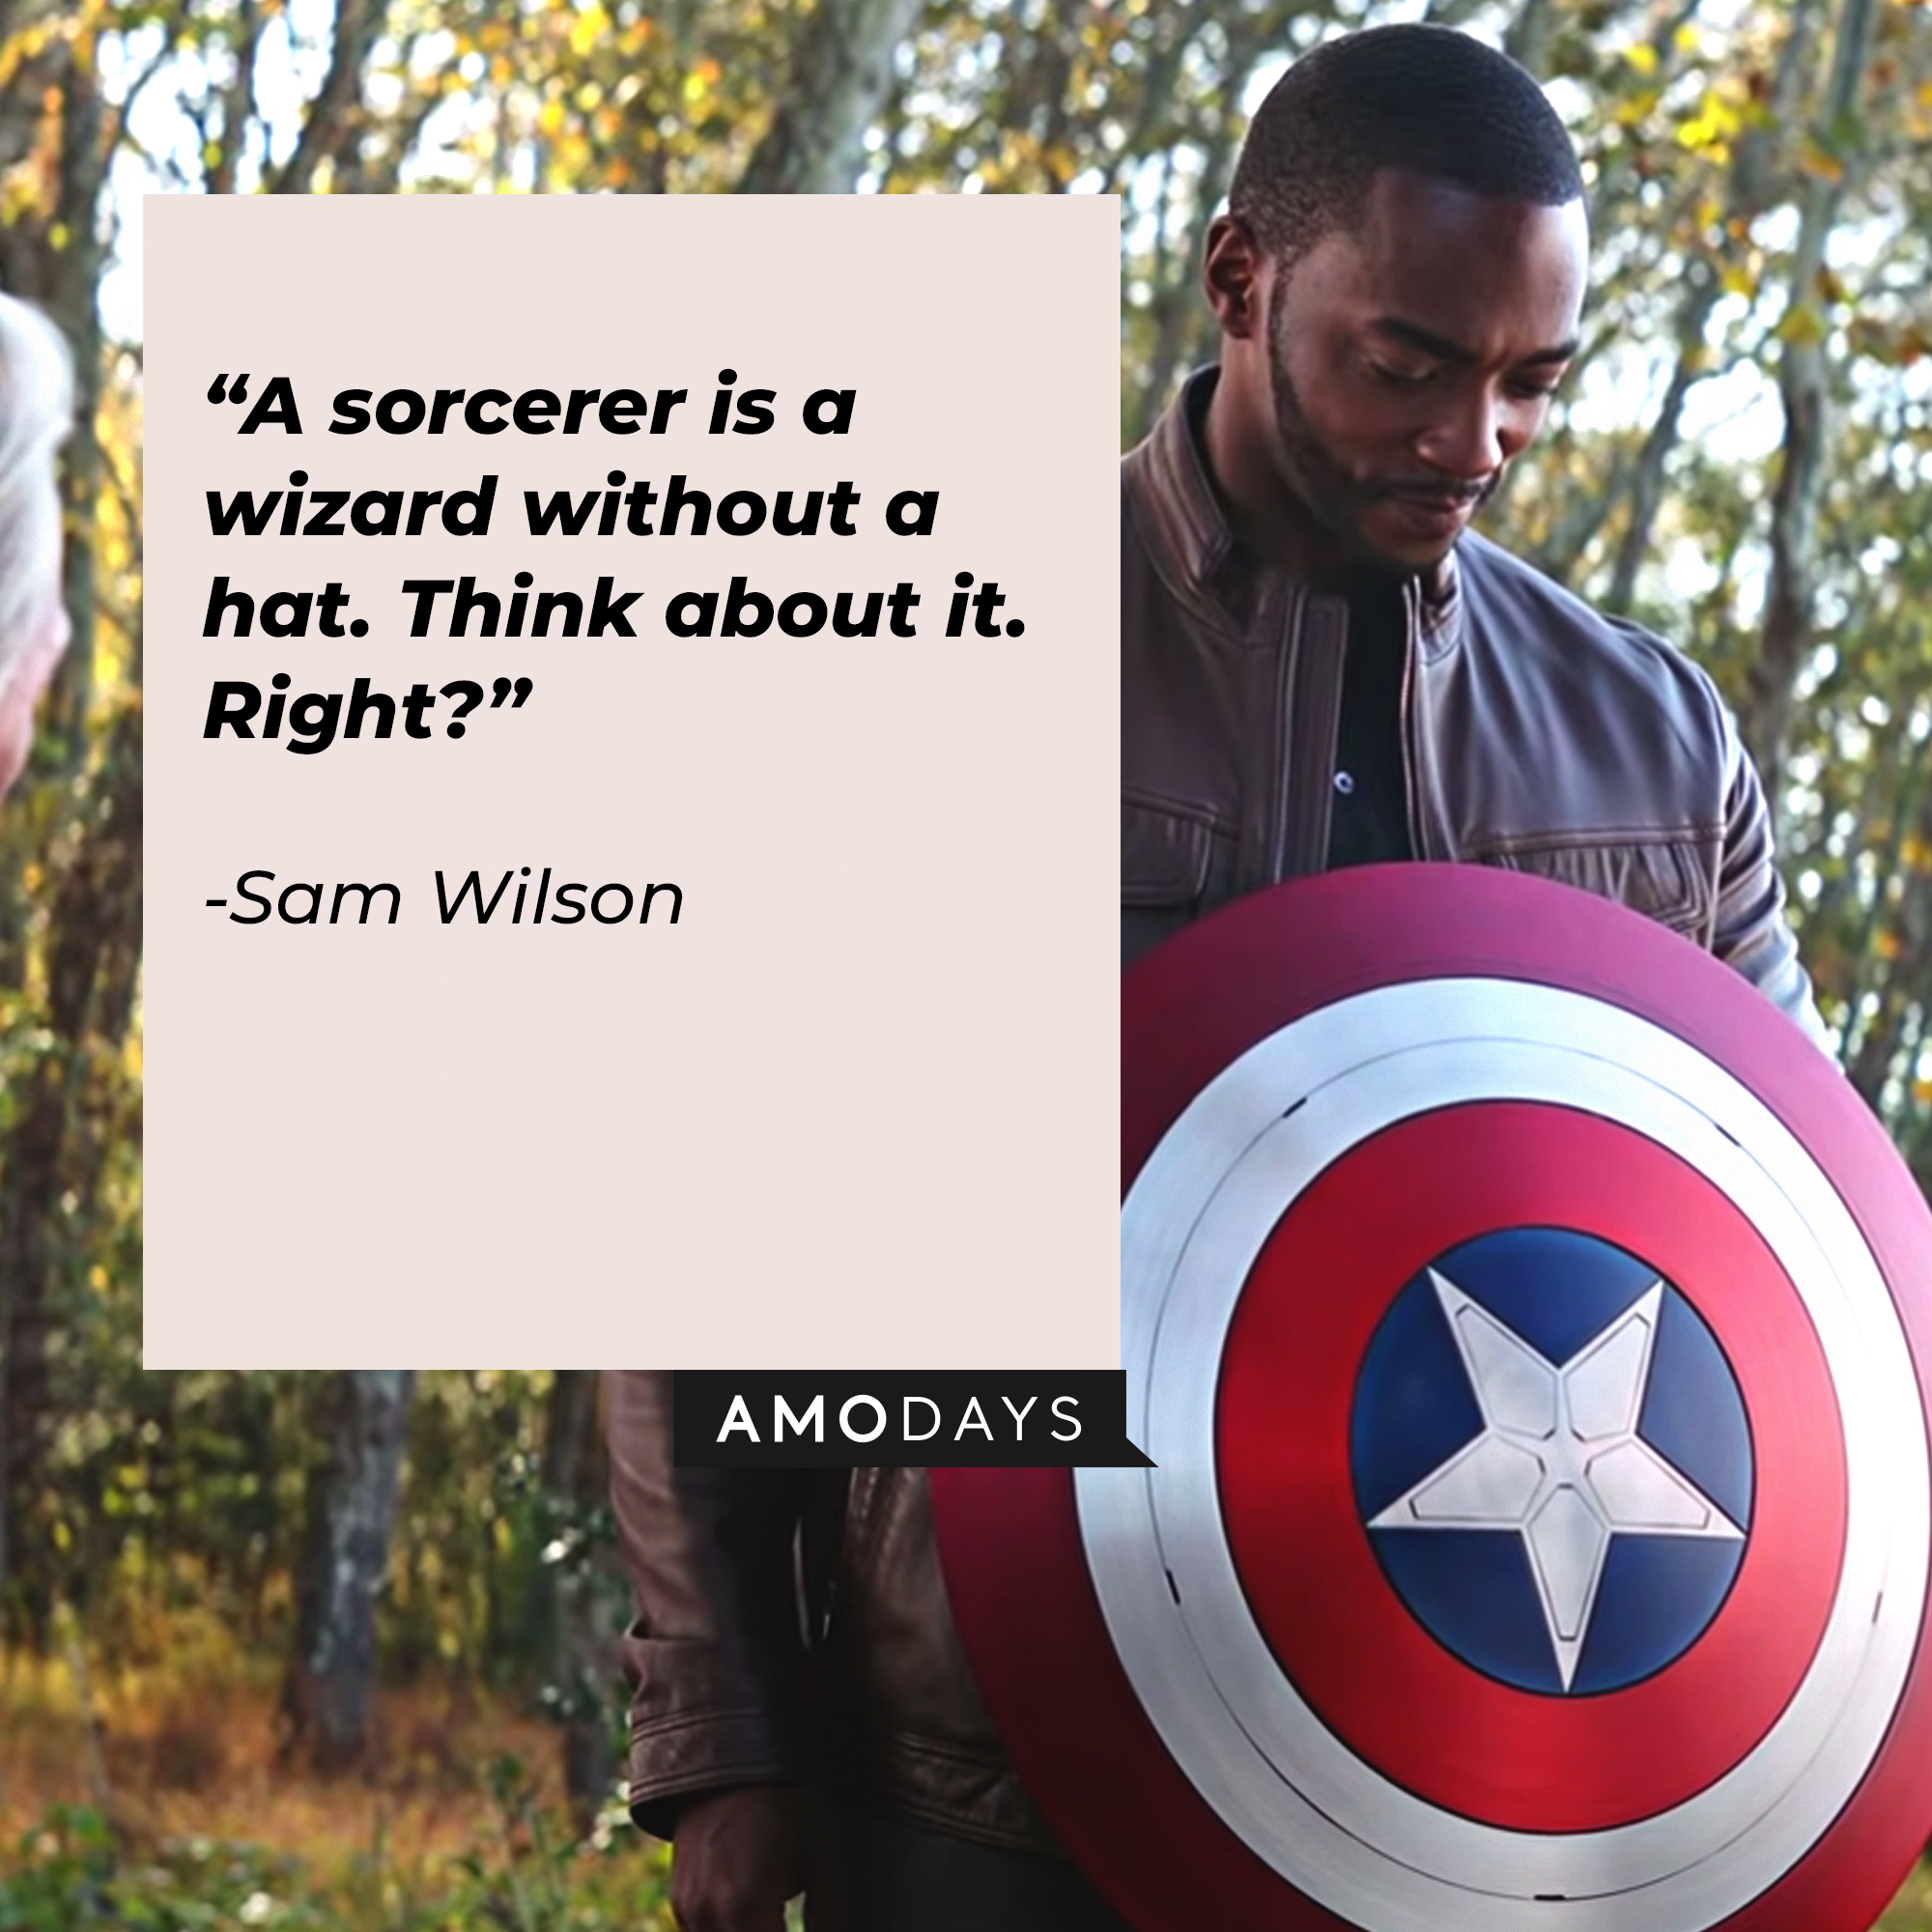 Sam Wilson, with his quote: “A sorcerer is a wizard without a hat. Think about it. Right?” | Source: Youtube.com/marvel